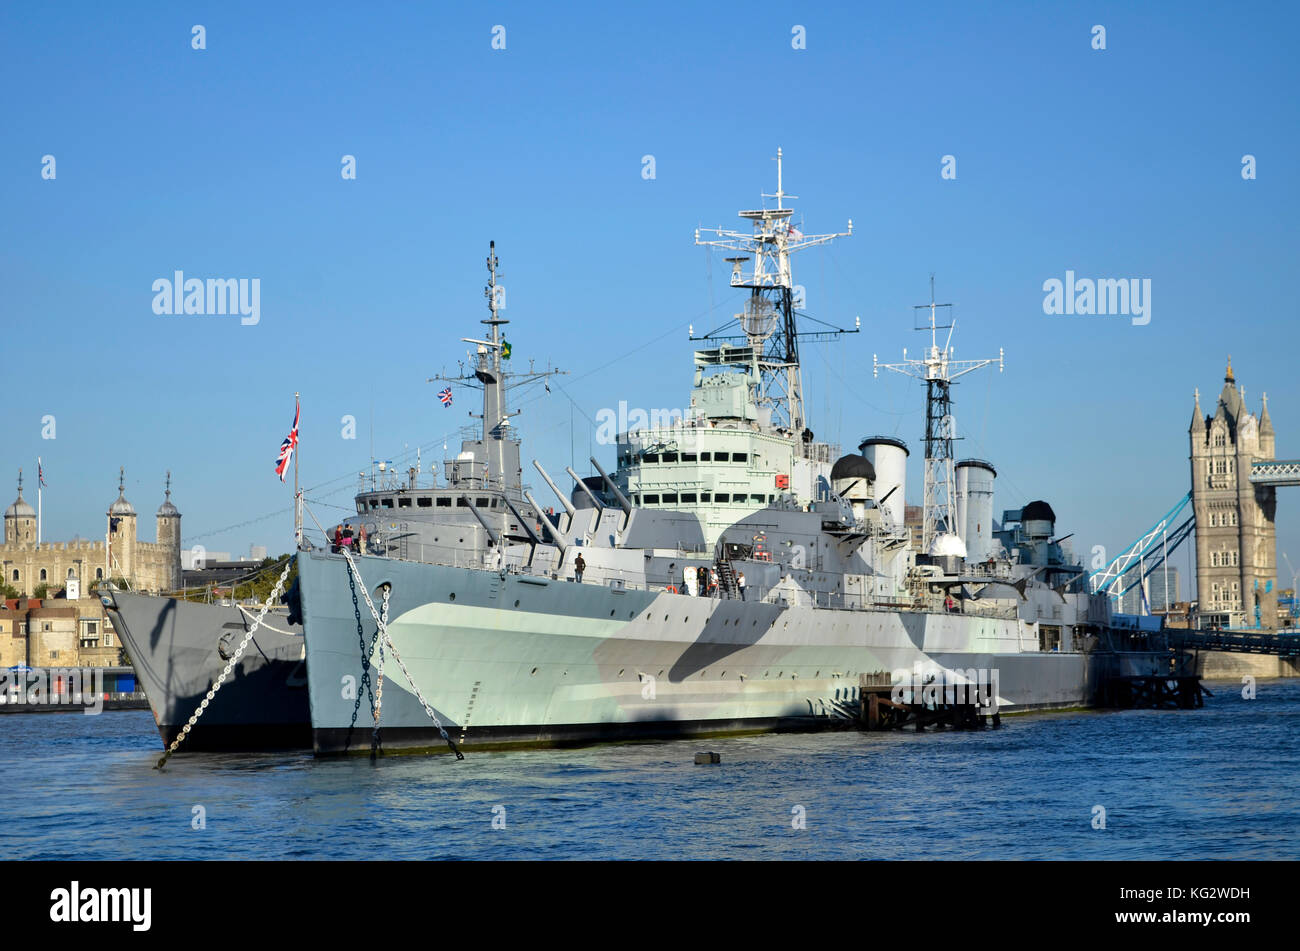 HMS Belfast, River Thames, London, UK. Brazilian Navy U27 training ship moored behind. Tower of London and tower Bridge in background. Stock Photo